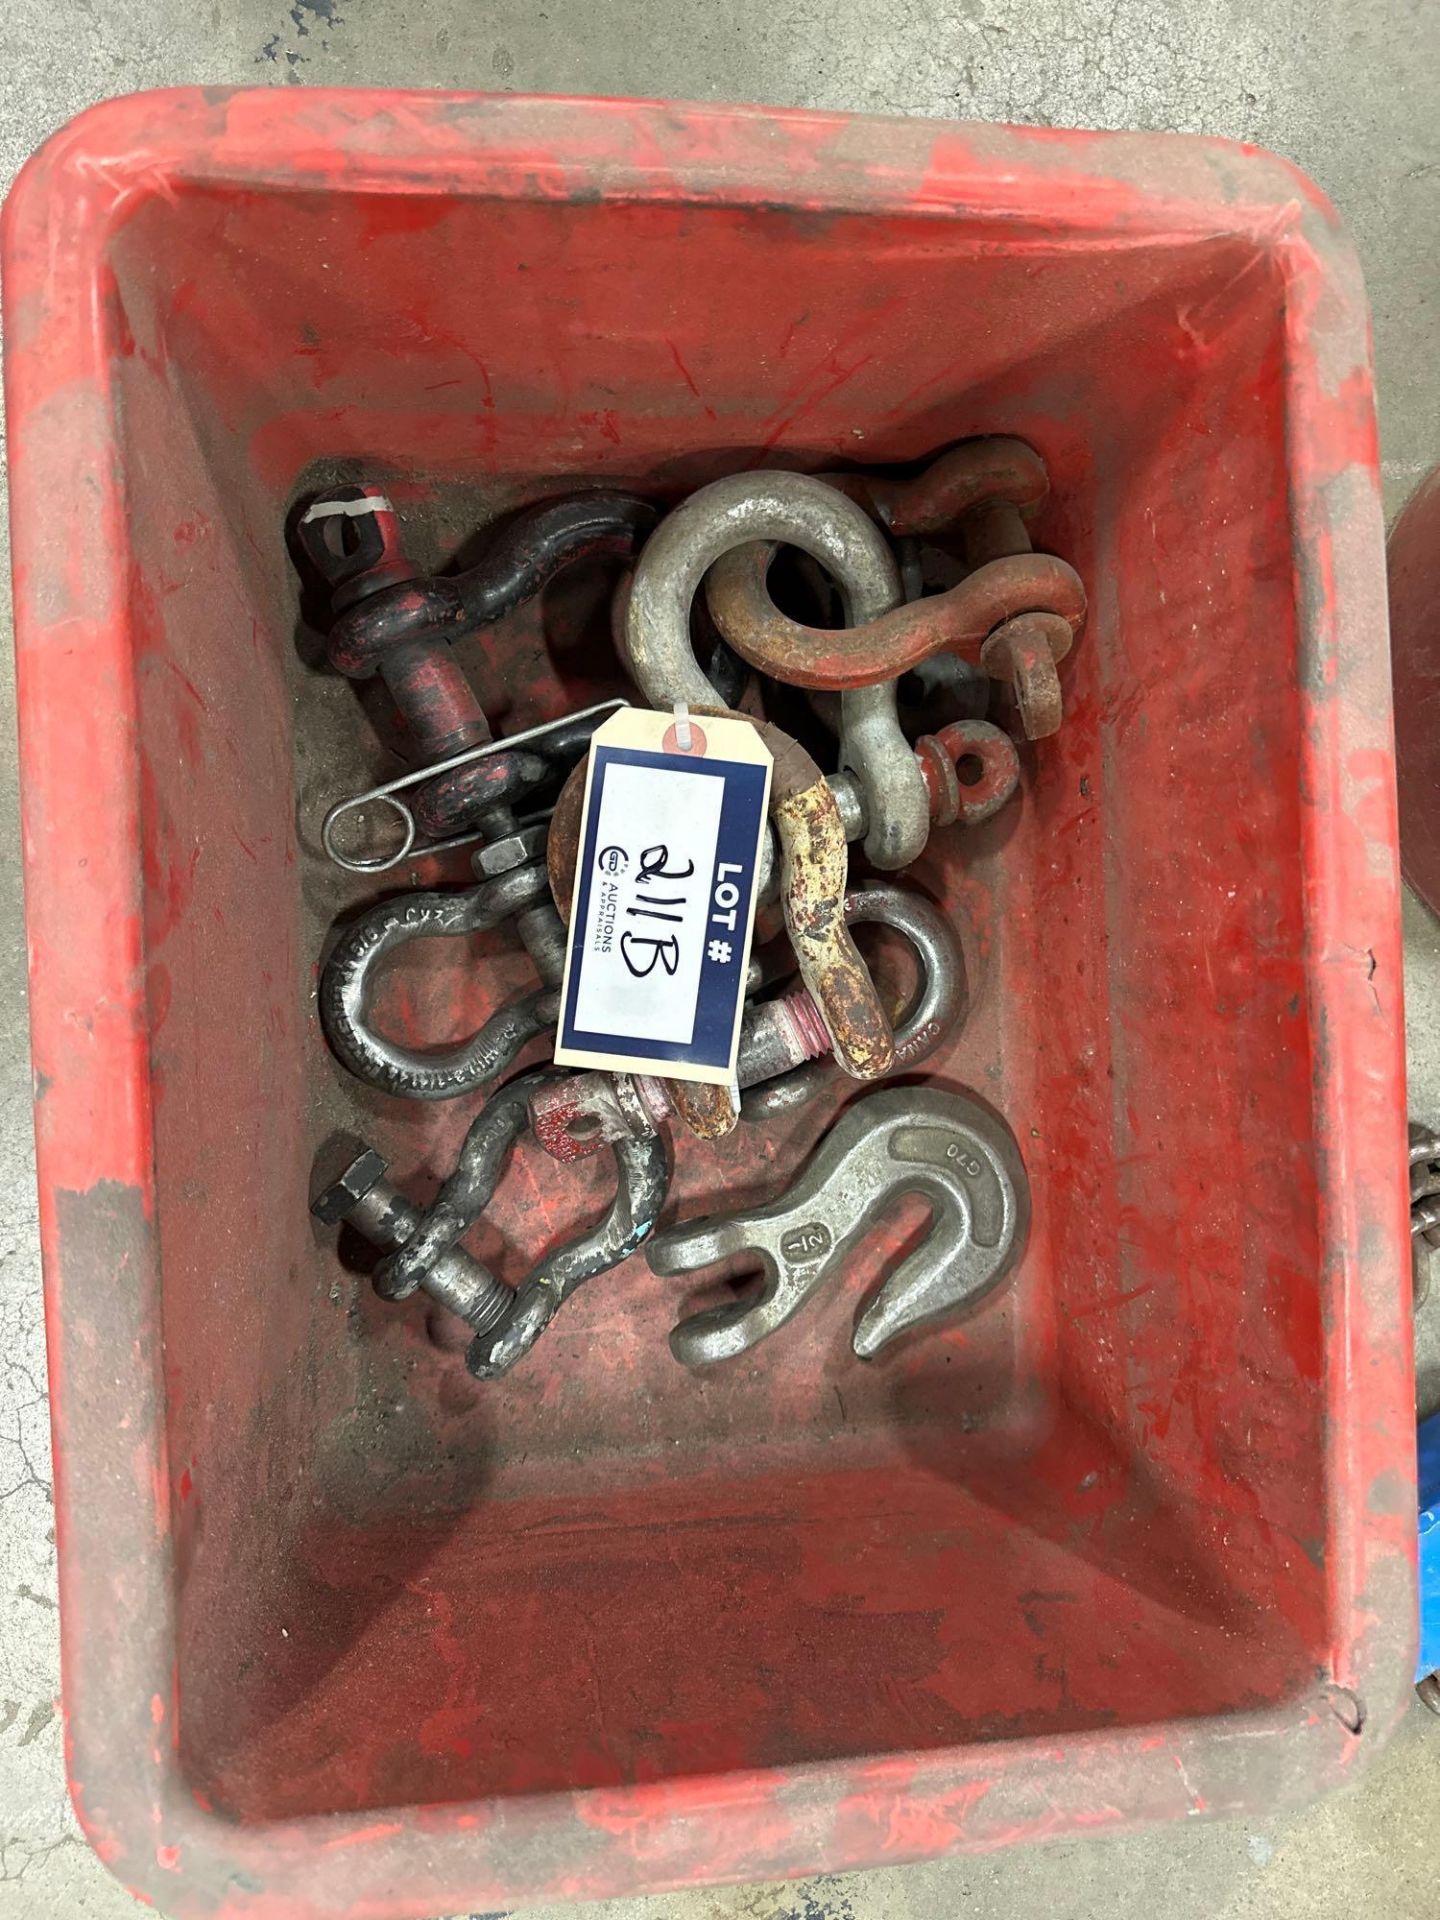 Lot of Asst. Magnetic Lifting Chain, Hoks, Shackles, Chains, etc. - Image 2 of 4